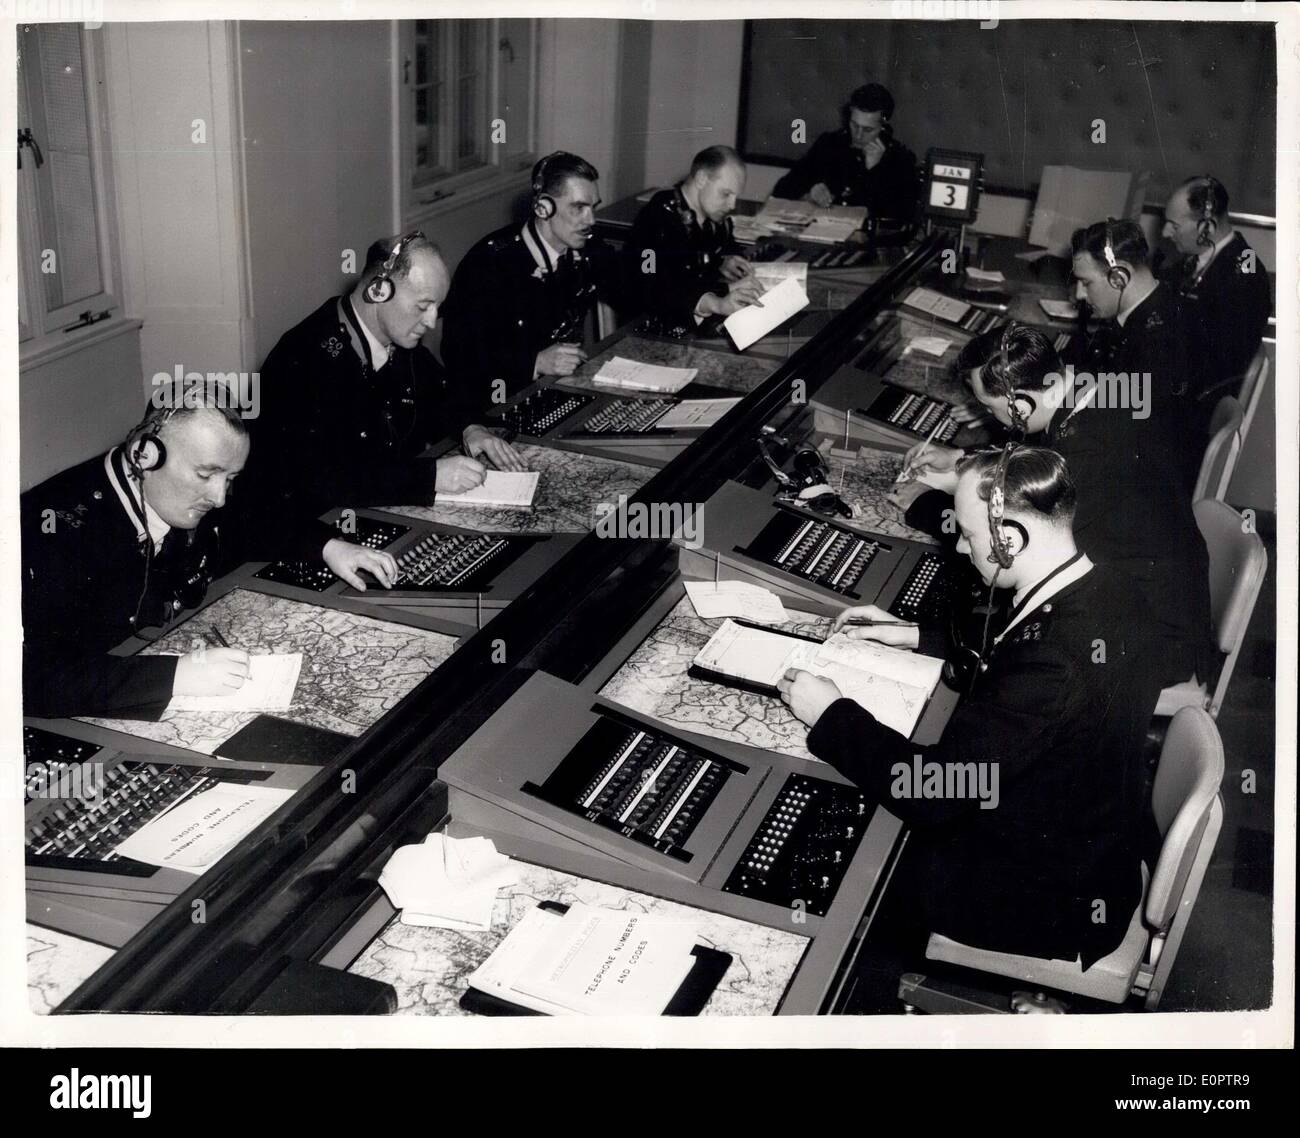 Dec. 28, 1956 - Scotland Yard's New Information Room: Scotland Yard's new Information Room has been designed to meet the great increase in 999 calls and to accommodate the new mechanically and electrically aided system of working now to be employed. It deals with incidents in the whole of the Metropolitan and City Police districts - an area of 736 square miles and a population o 81/2 million. The Information Room is a clearing centre where information about matters requiring police attention is received and distributed Stock Photo